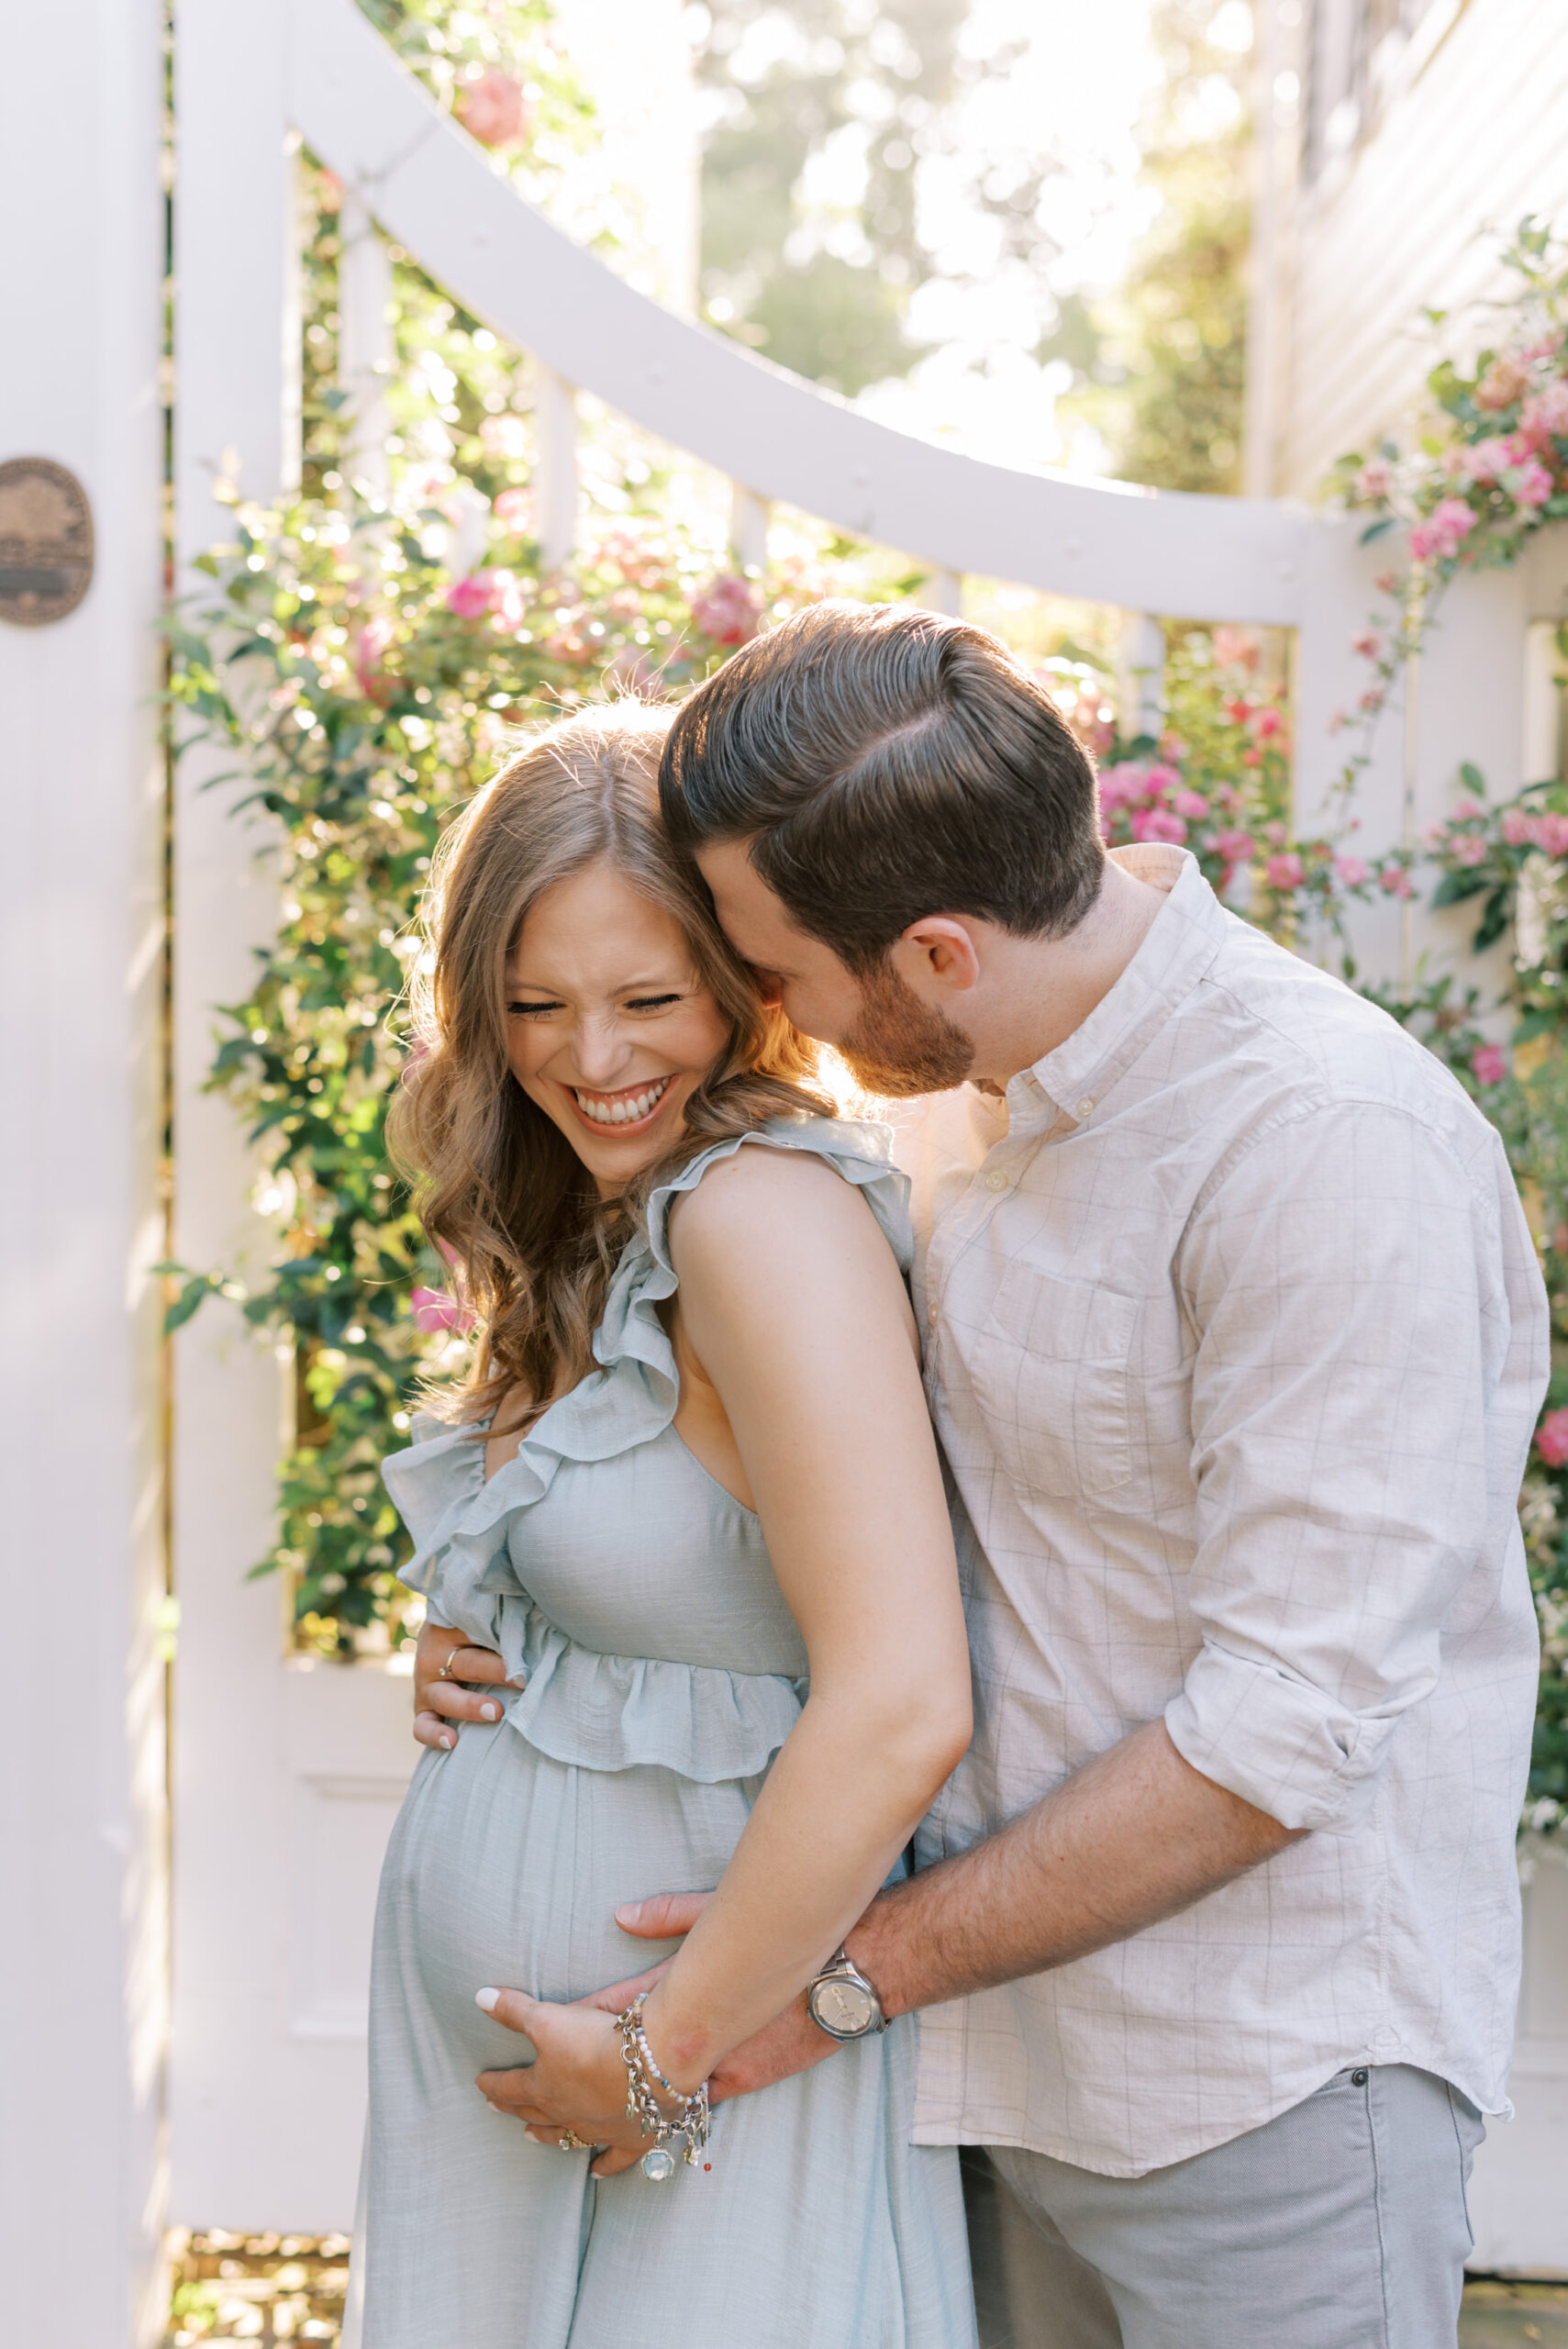 Man kisses his wife on the cheek in front of a gate covered in flowers maternity session